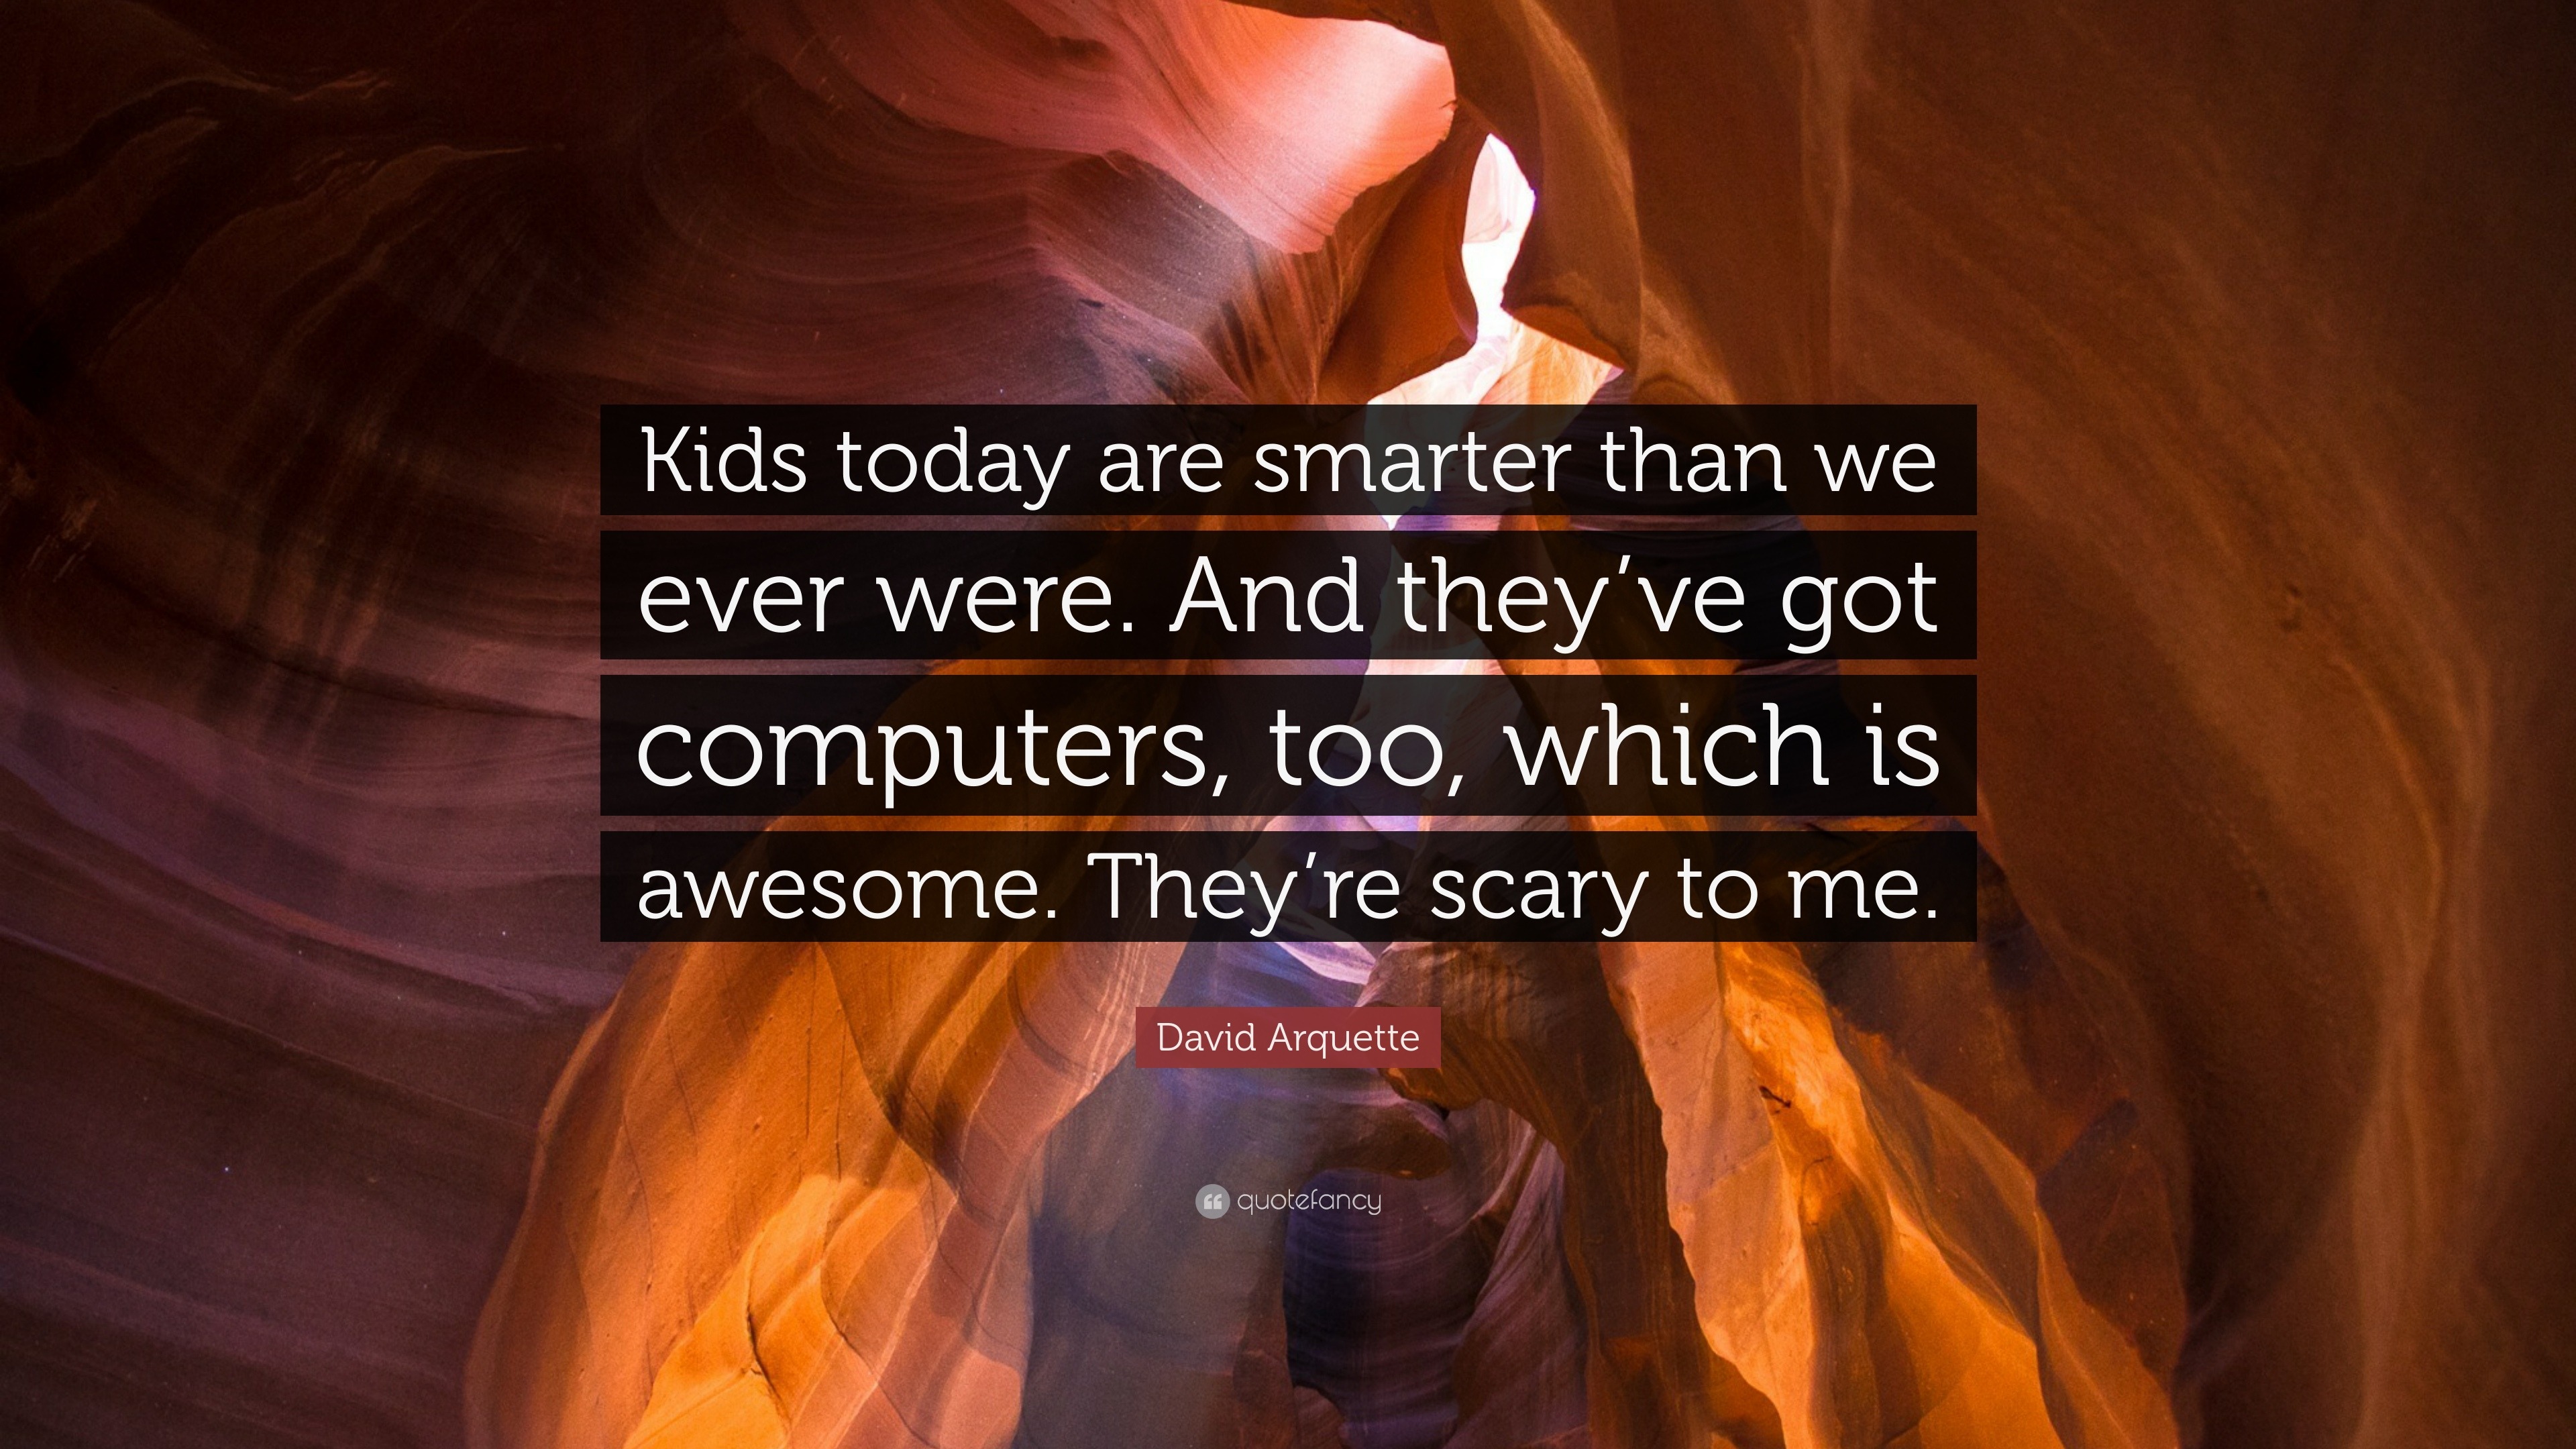 David Arquette Quote: “Kids today are smarter than we ever were. And